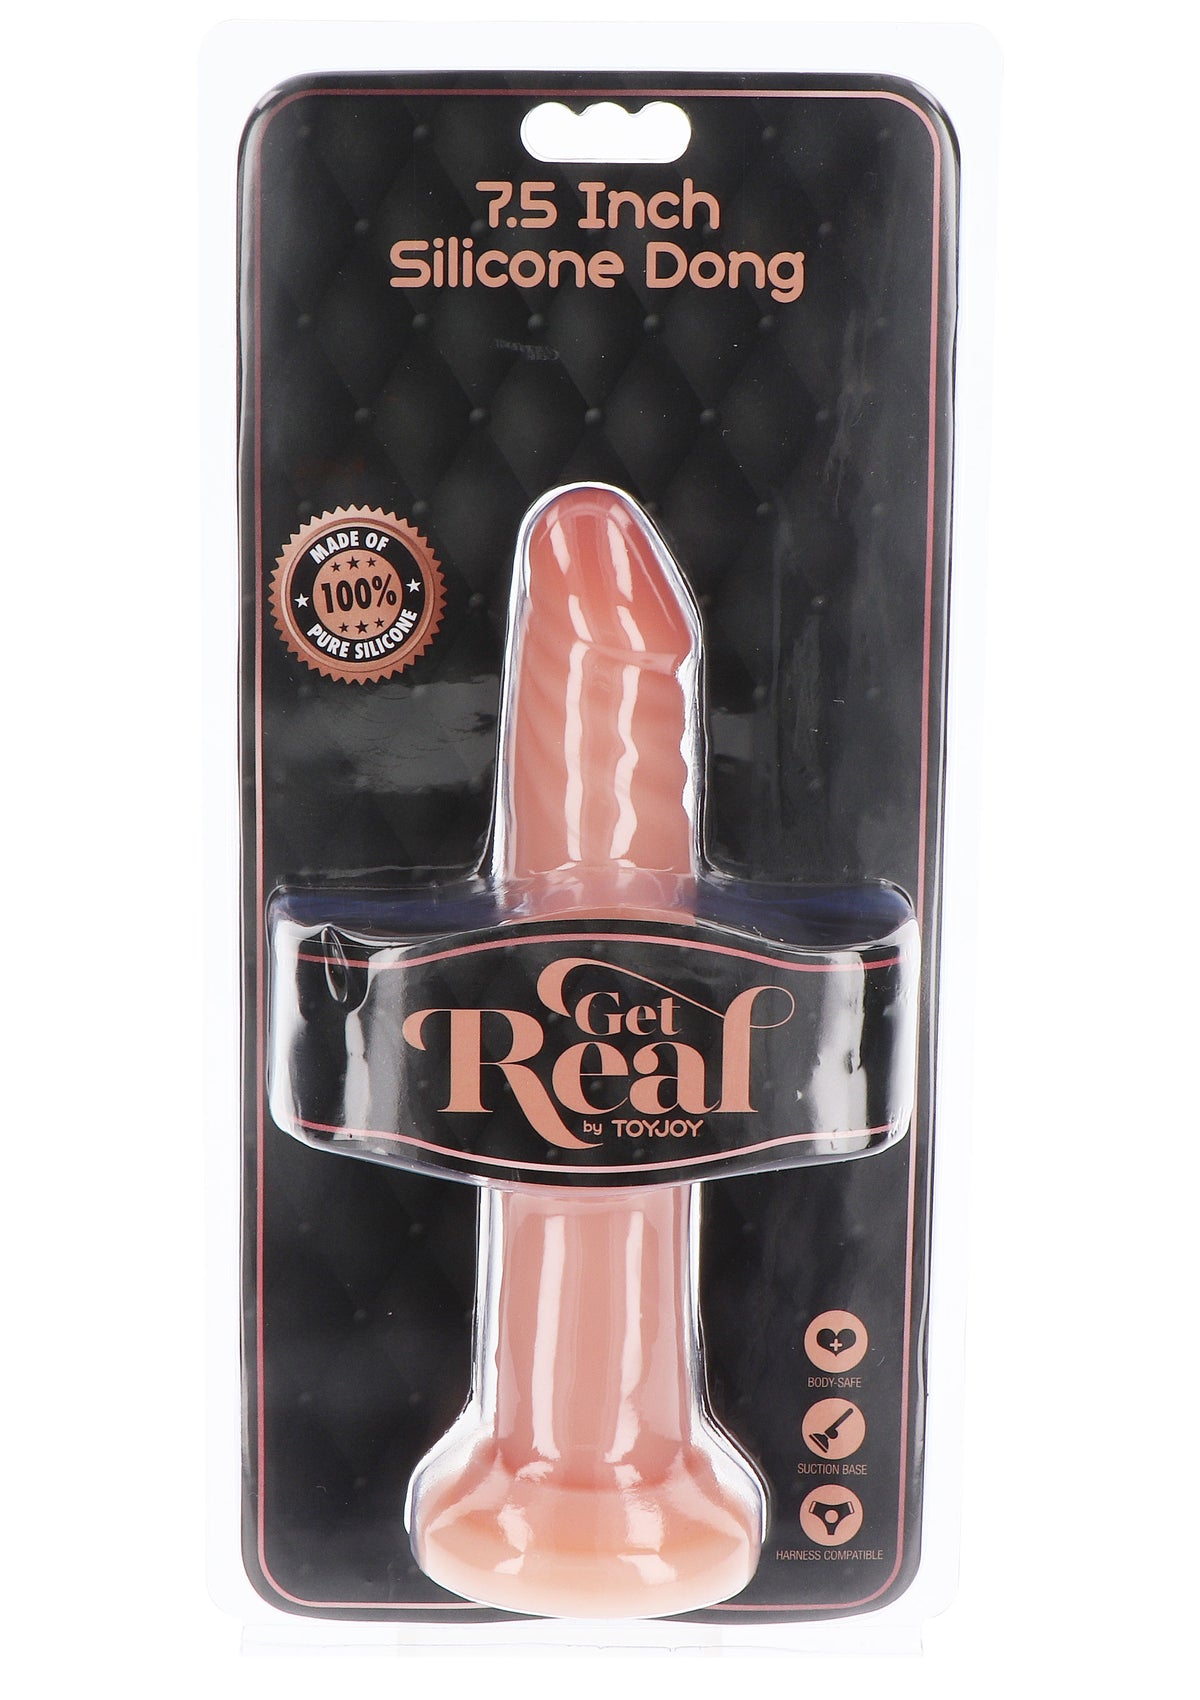 Silicone Dong 7.5 Inch-erotic-world-munchen.myshopify.com